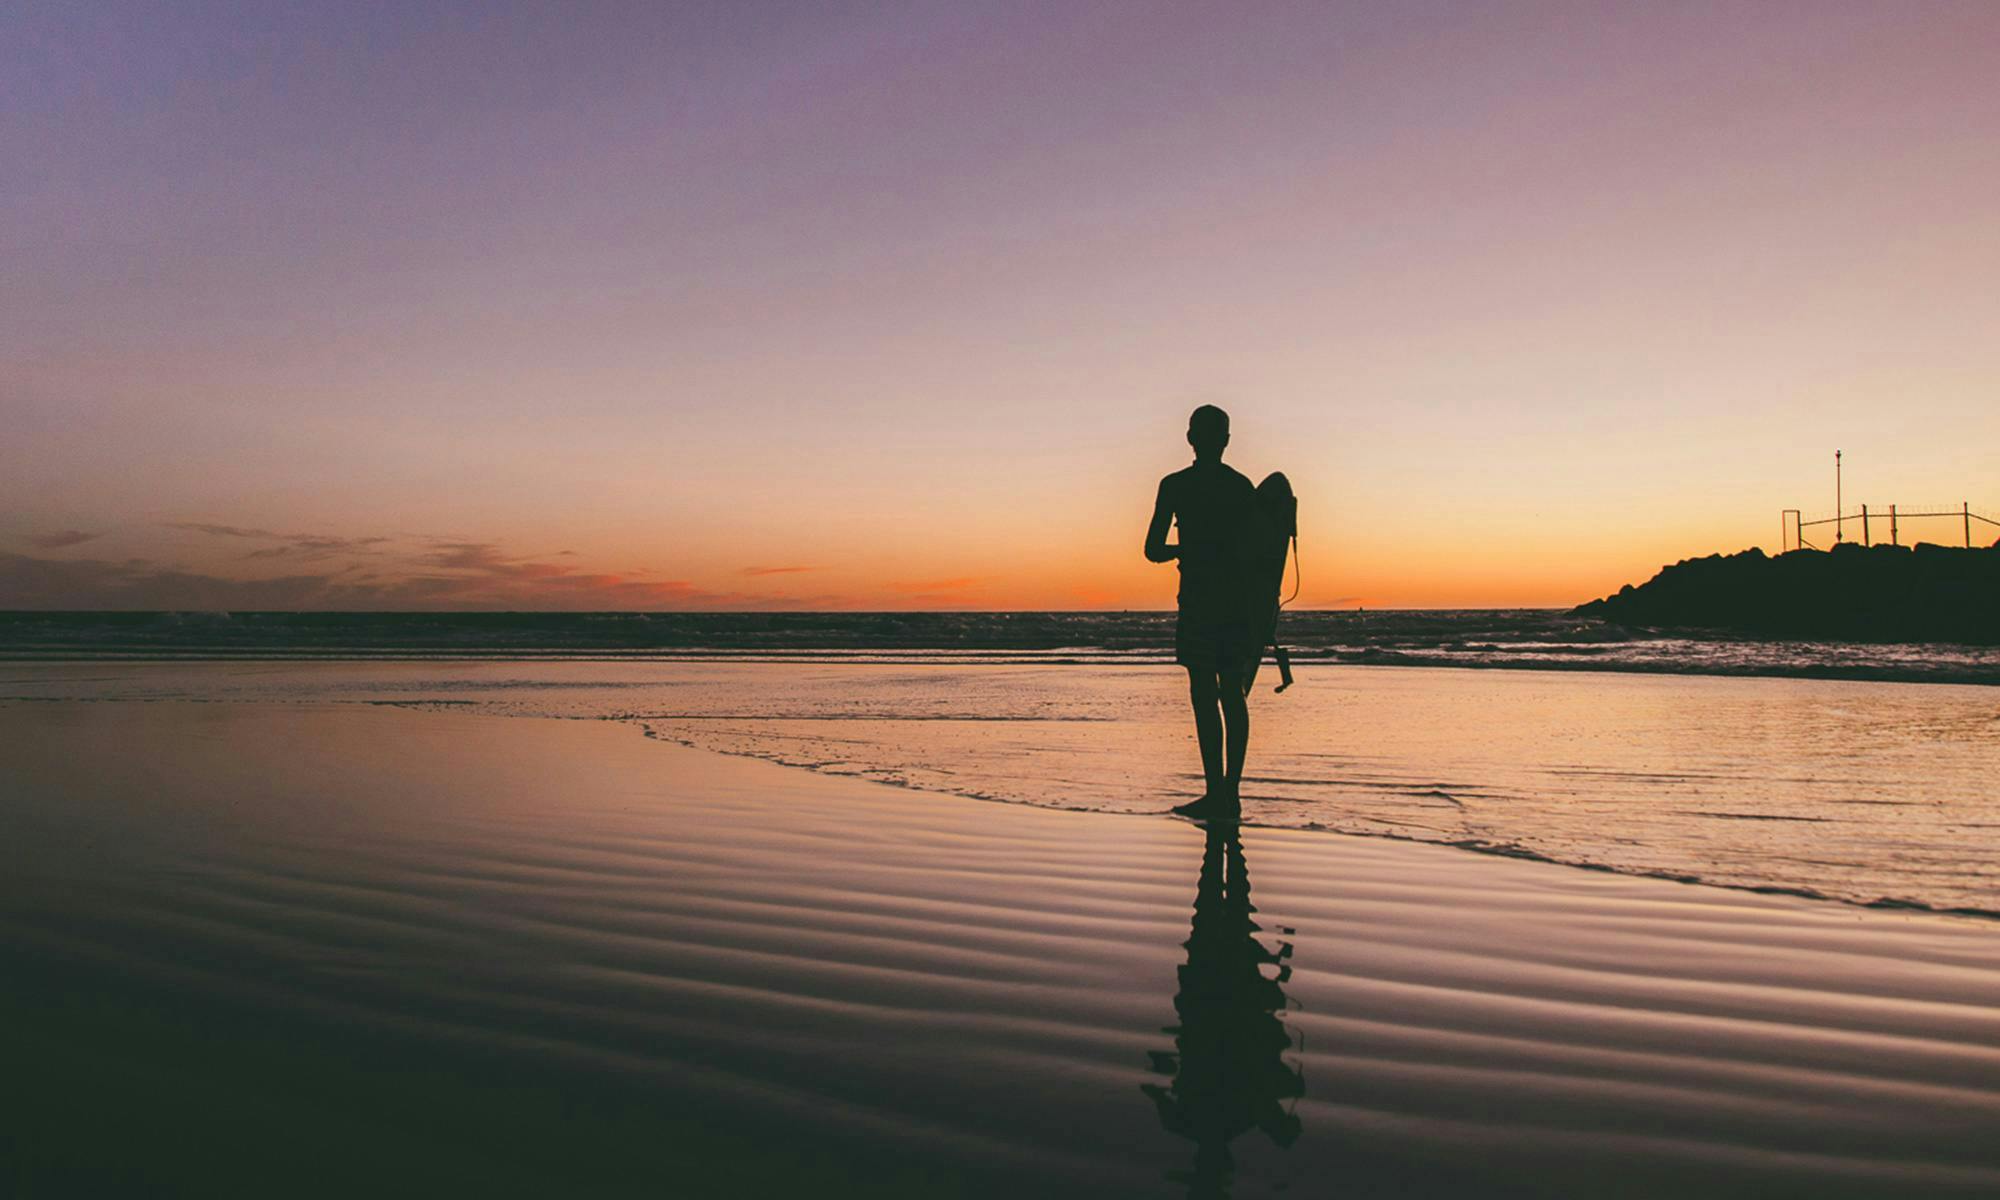 Surfer standing on the beach at sunset